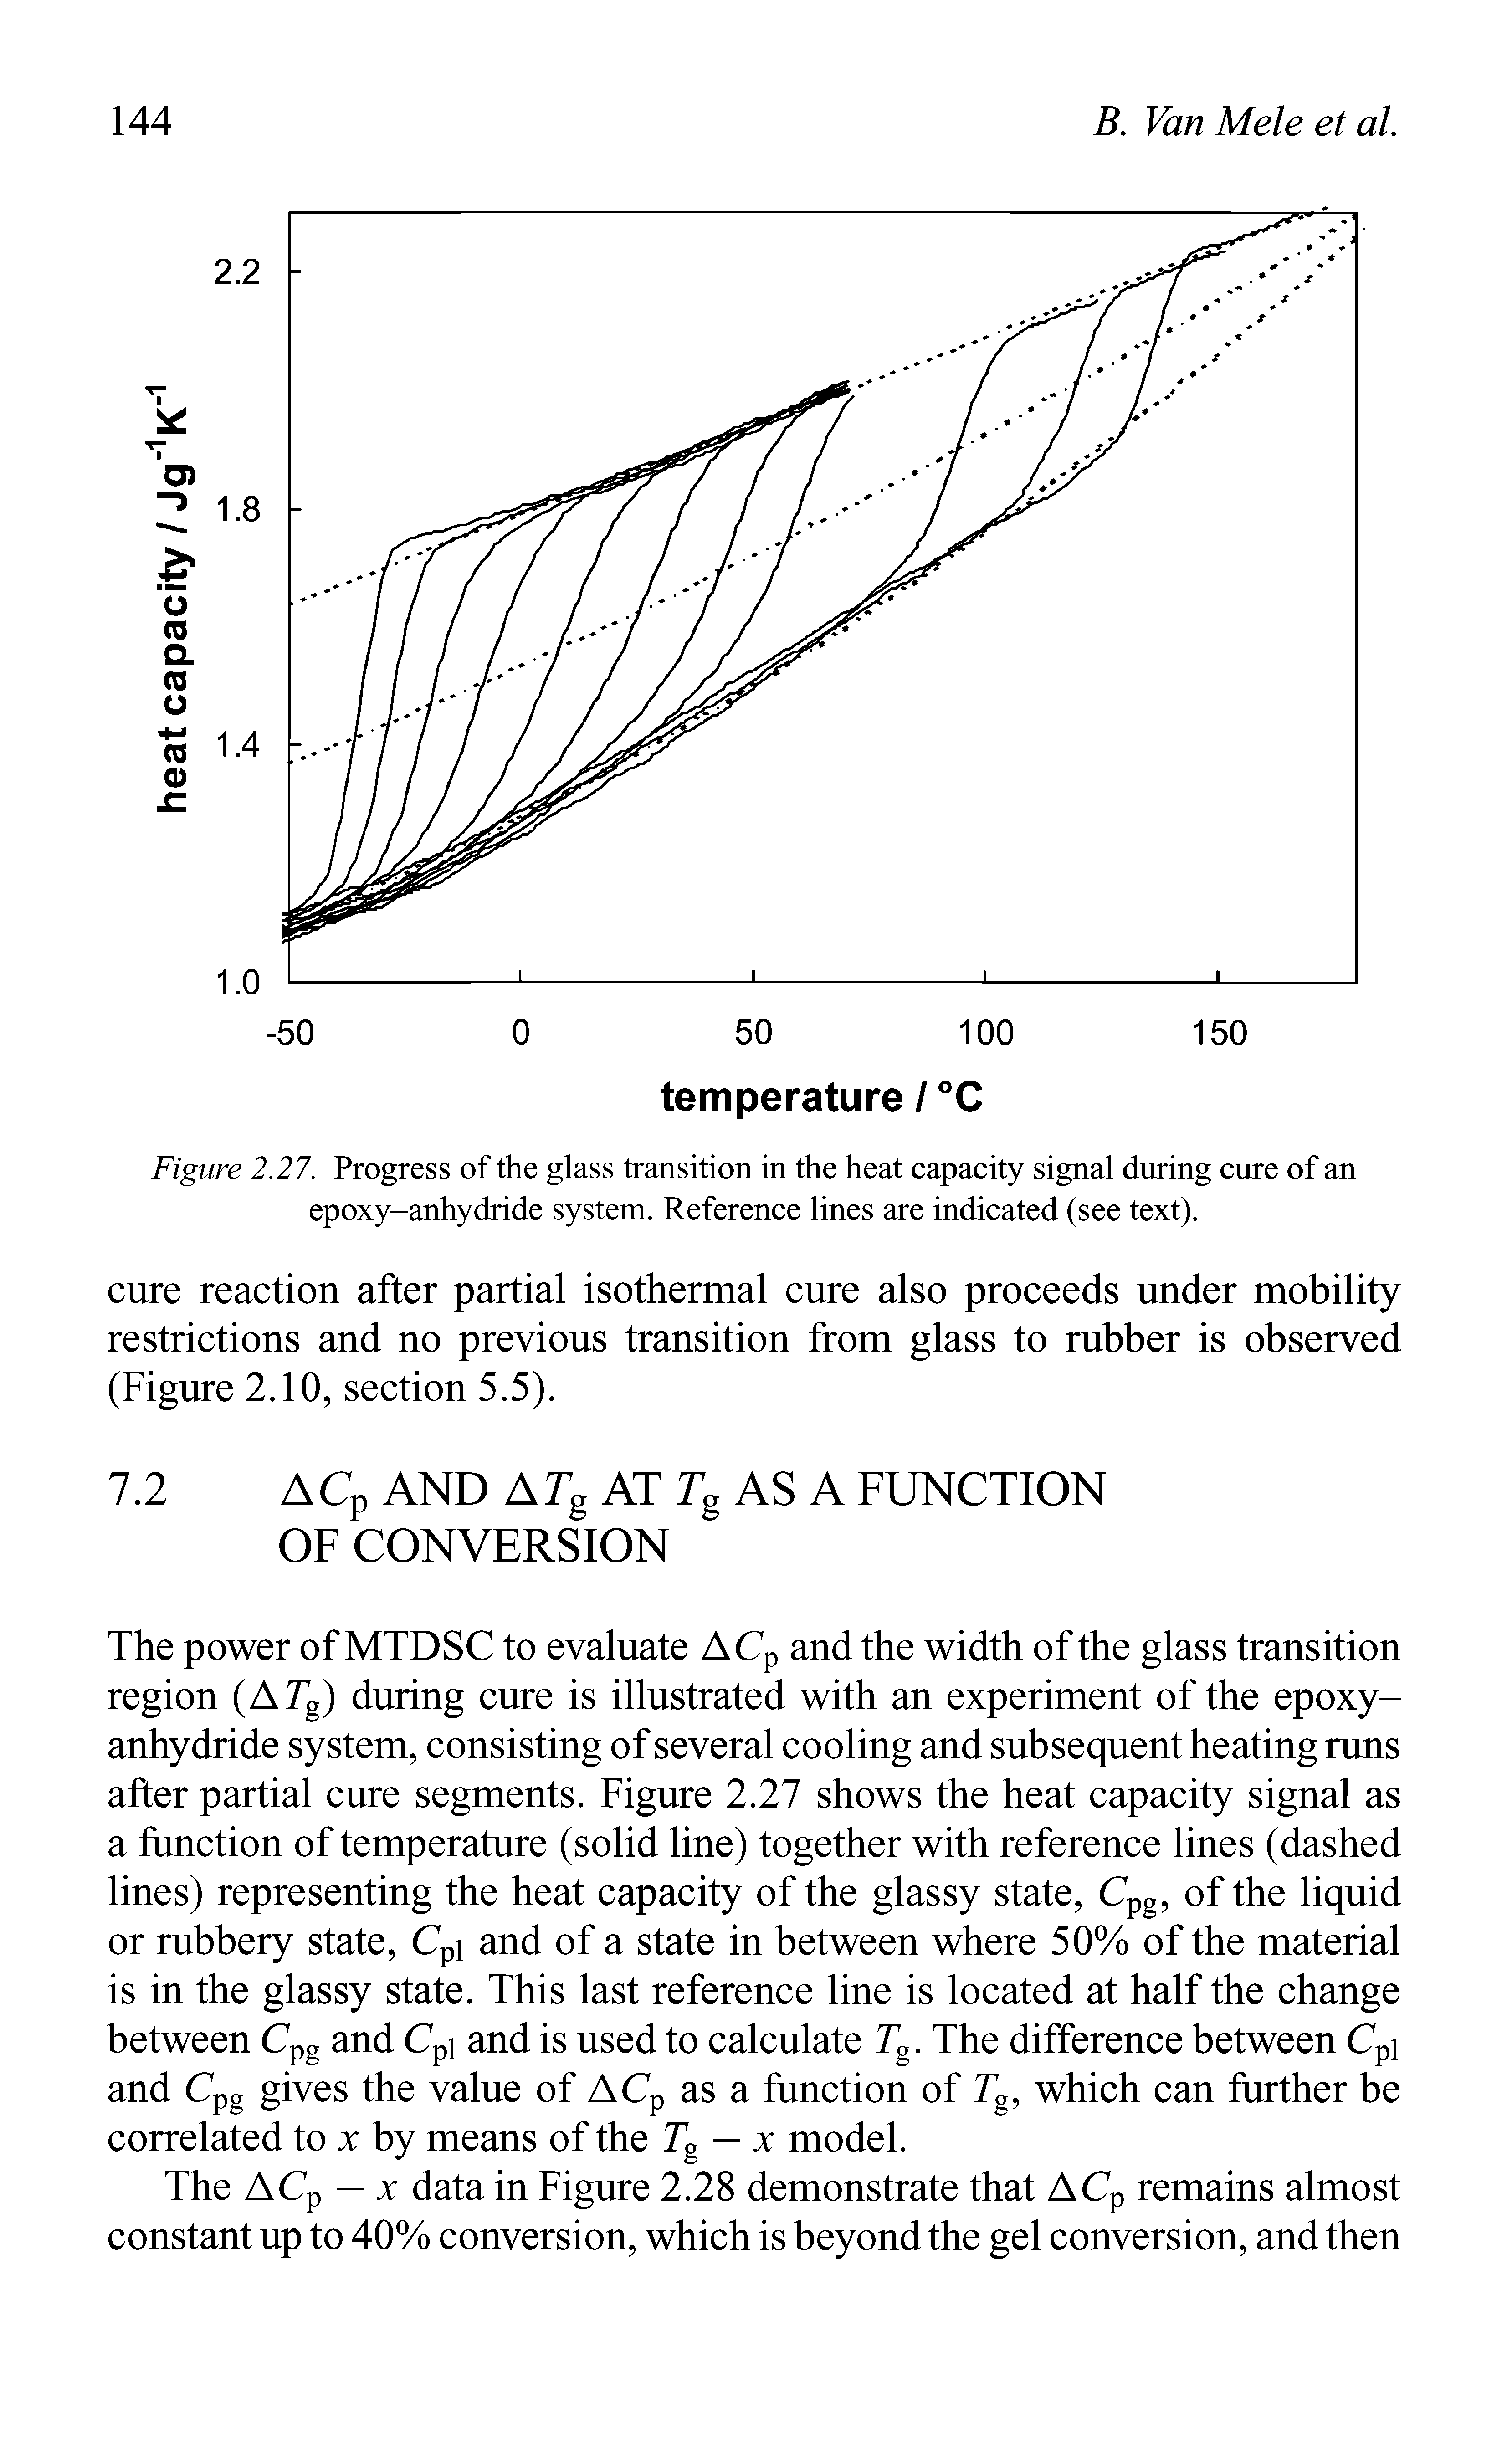 Figure 2.27. Progress of the glass transition in the heat capacity signal during cure of an epoxy-anhydride system. Reference lines are indicated (see text).